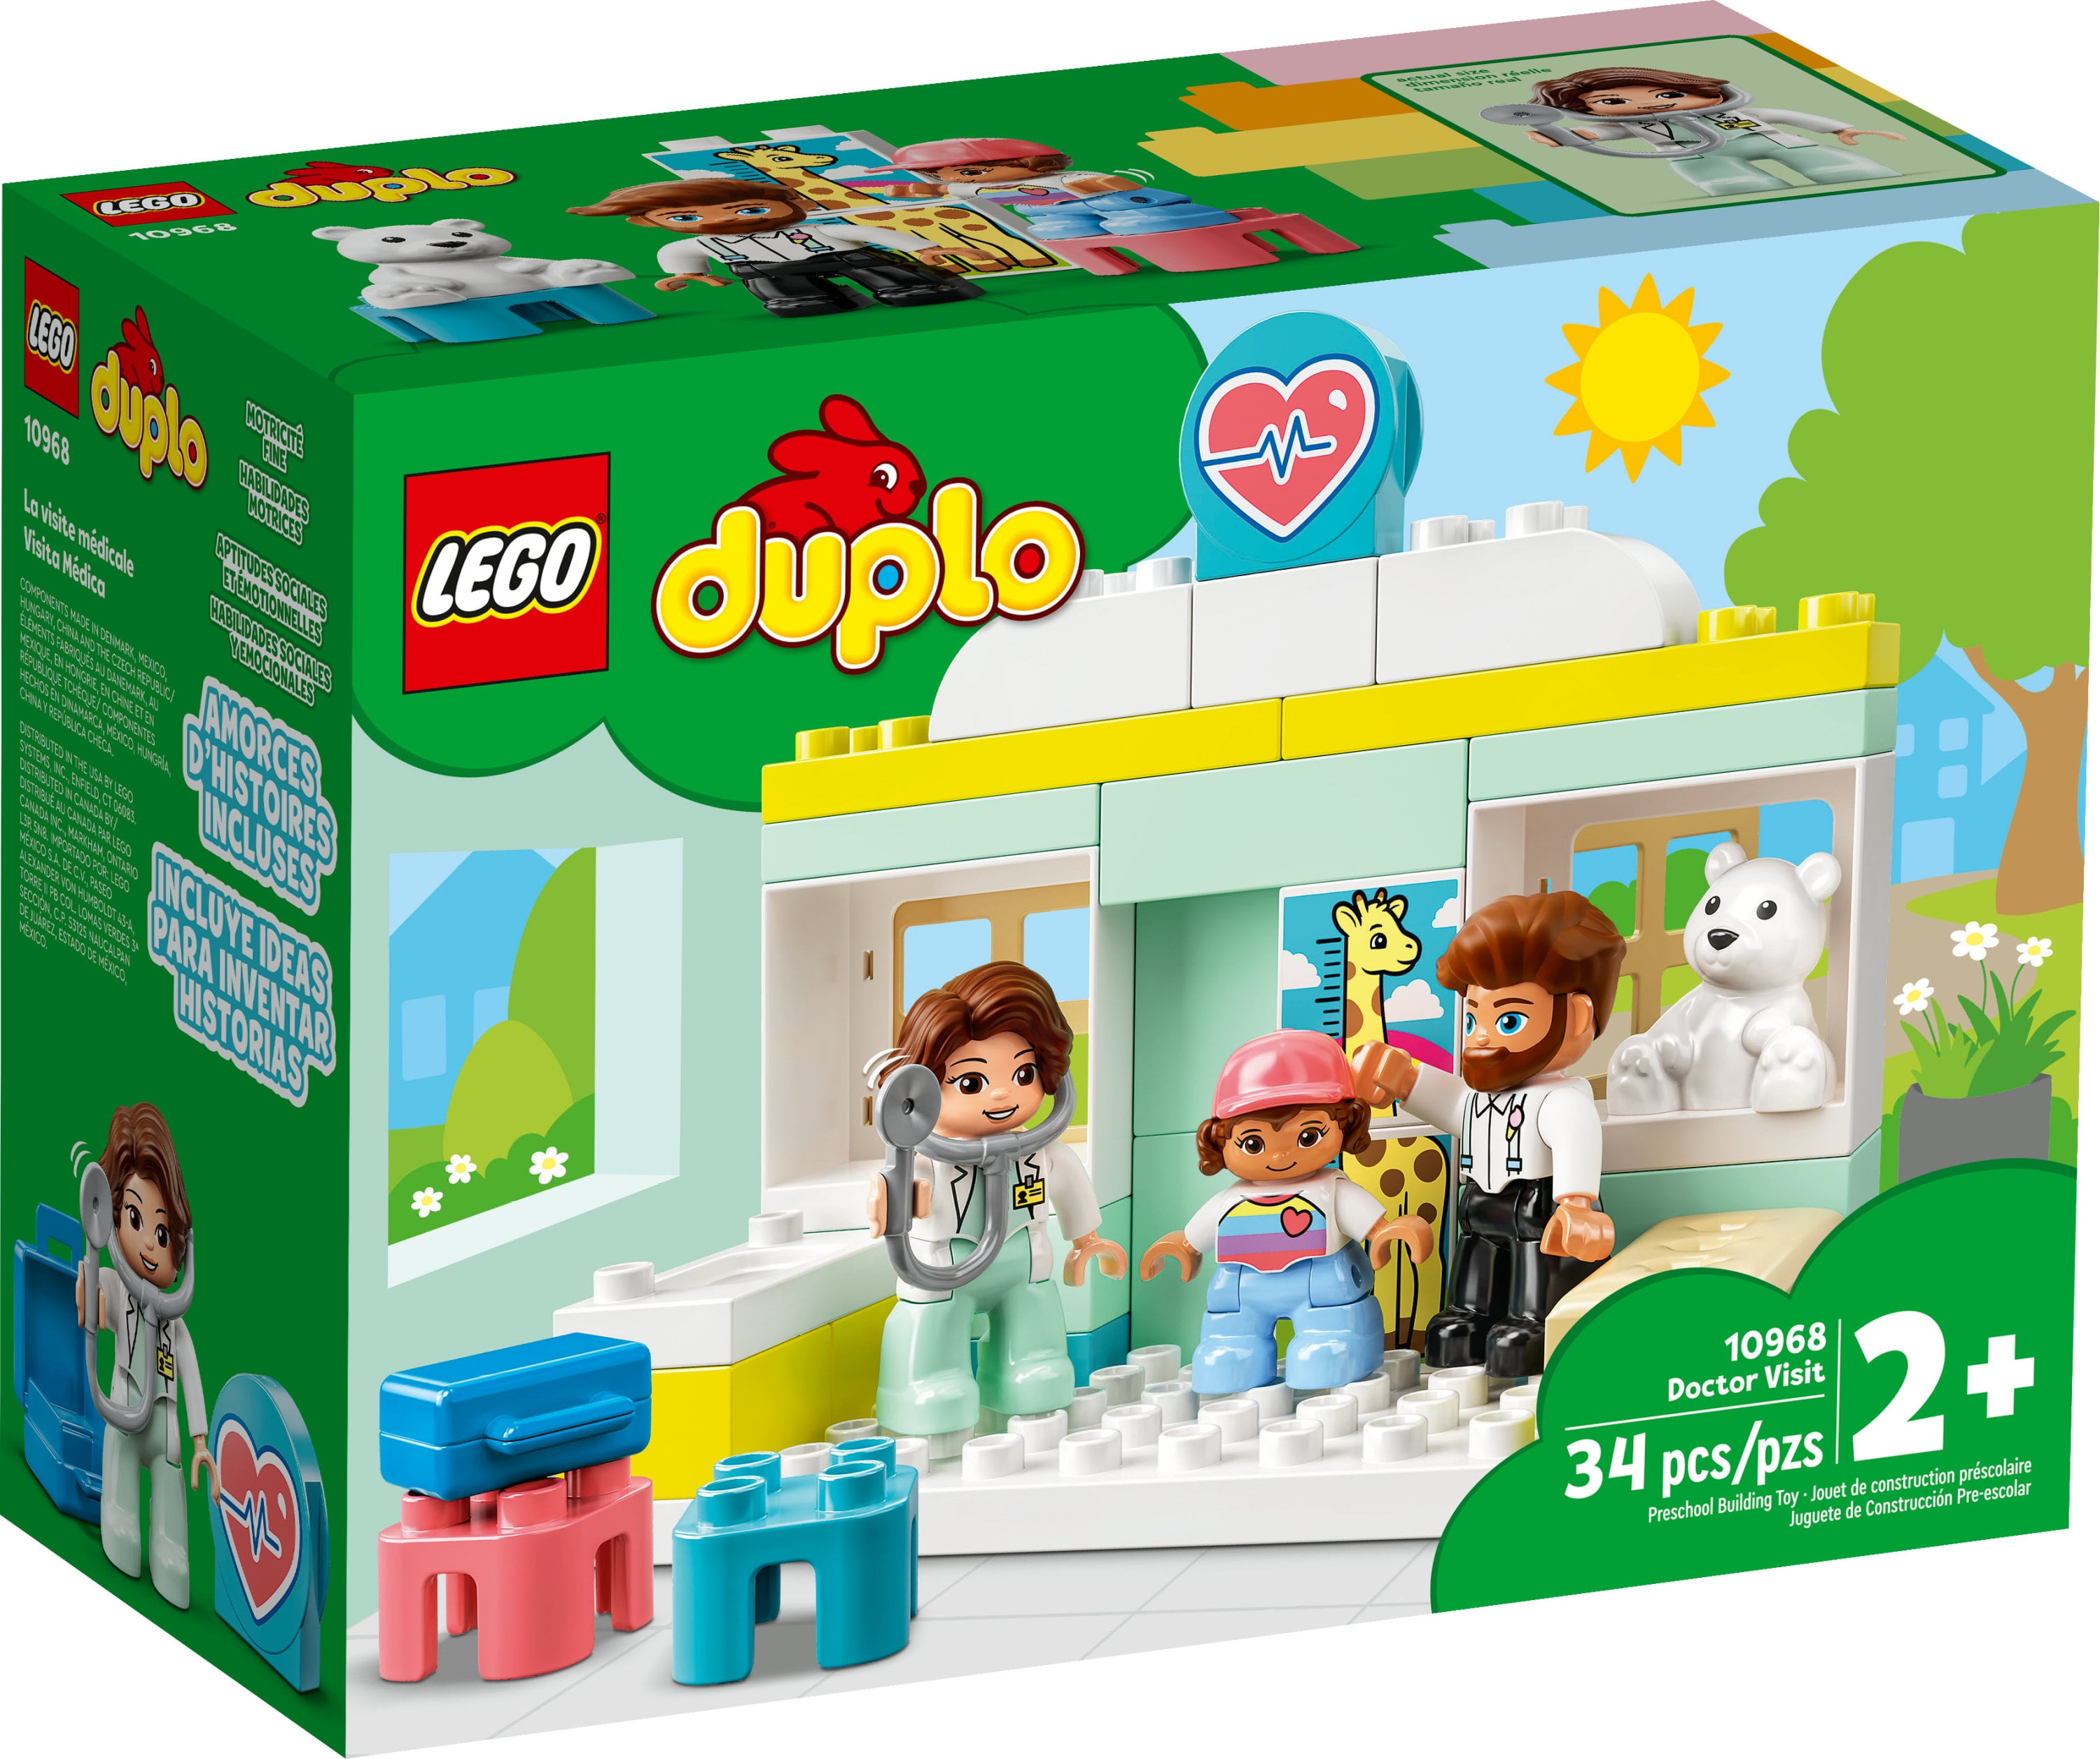 LEGO DUPLO Doctor Visit 10968 - Large Bricks Building Set, Educational Early Learning Toy, Includes Doctor, Father, and Child Great Development Gift for Toddlers, and Boys 2+ Years Old - Walmart.com